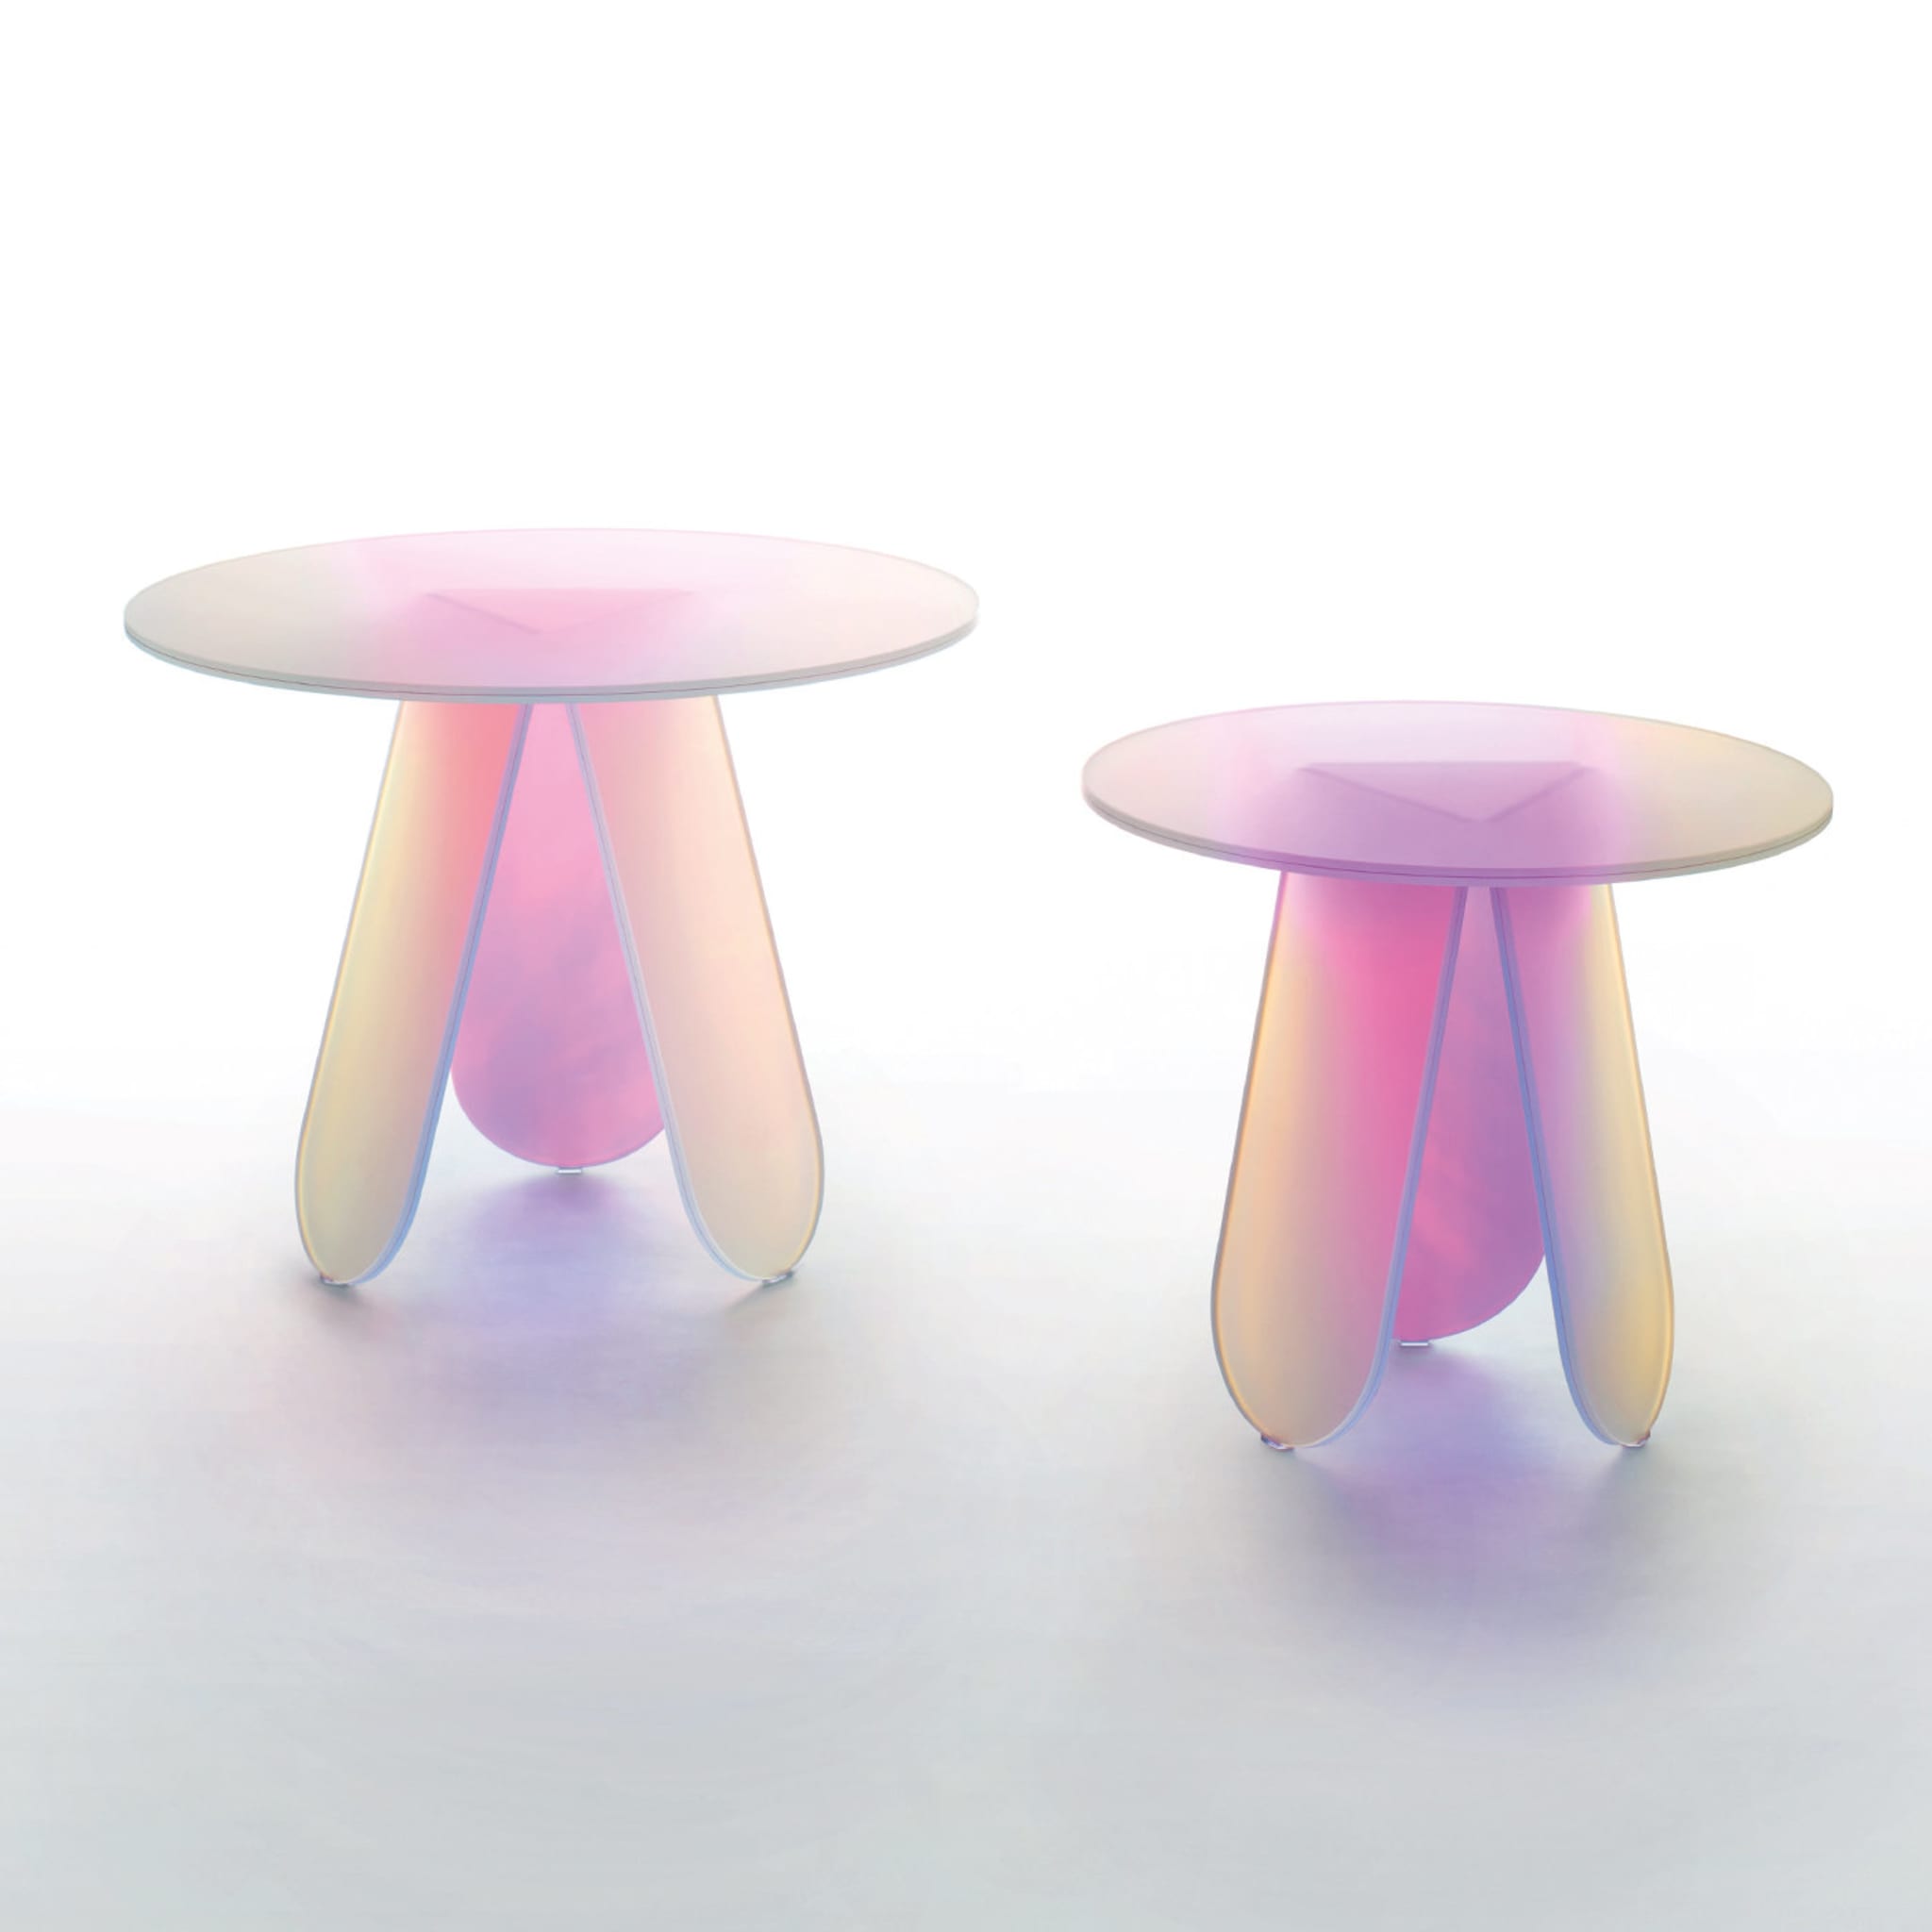 Shimmer Small Low Table by Patricia Urquiola - Alternative view 1